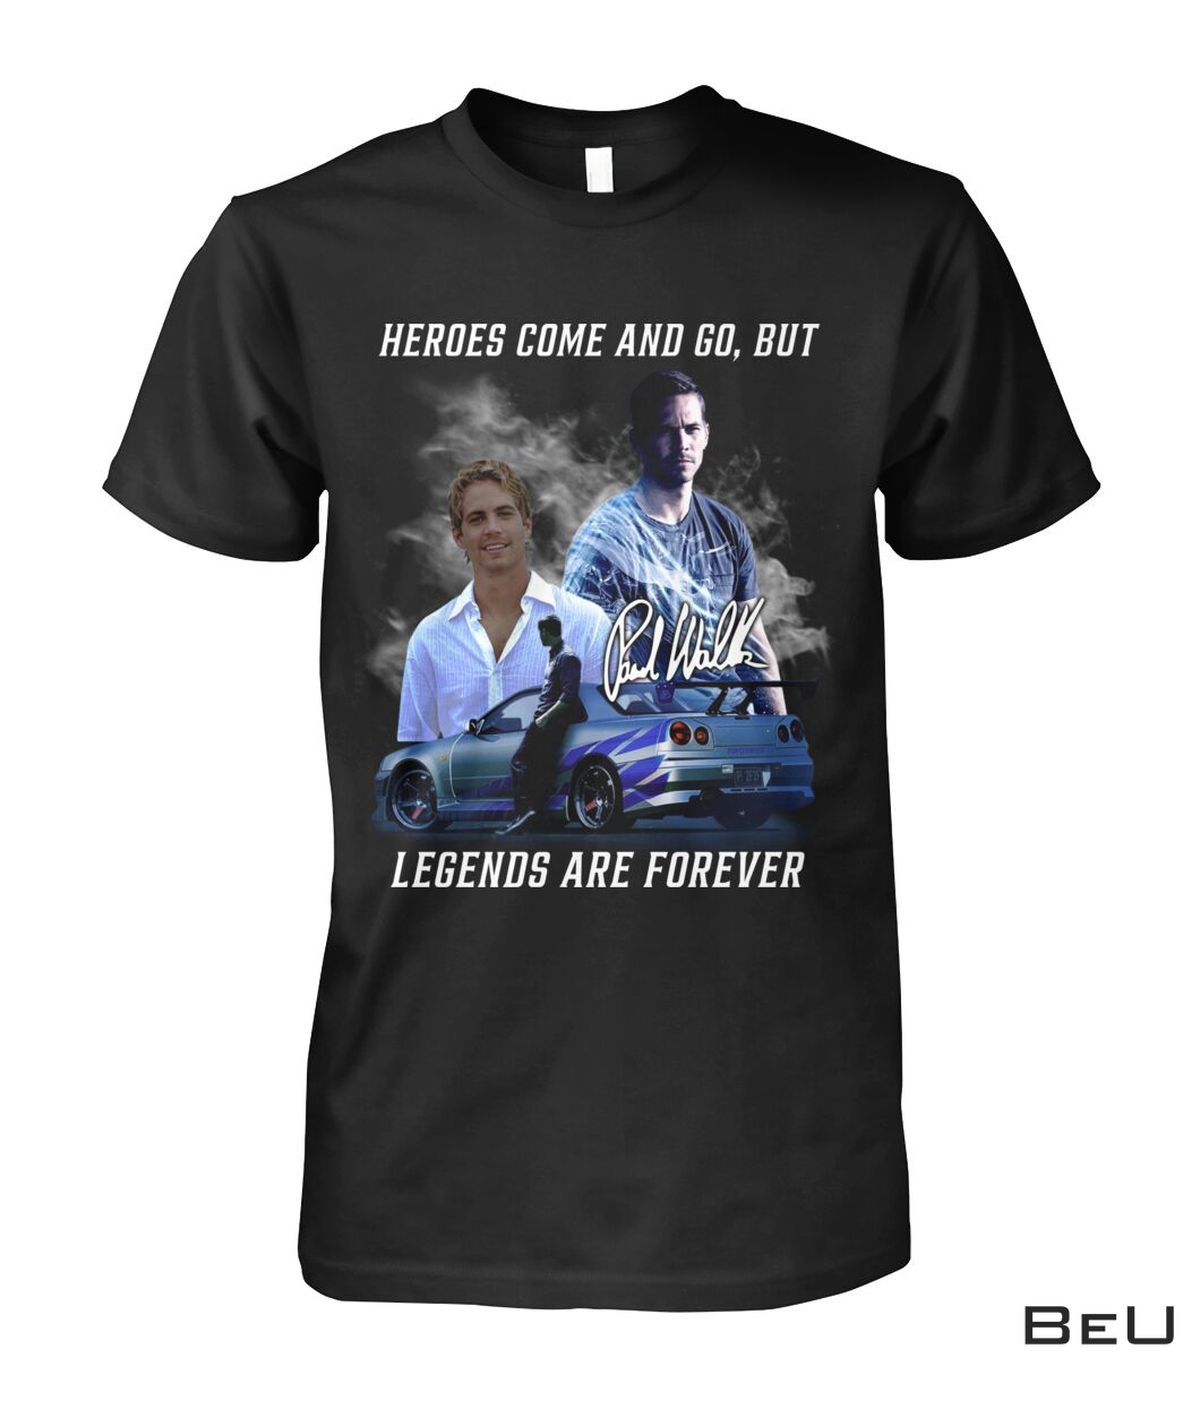 Paul Walker Heroes Come And Go But Legends Are Forever Shirt